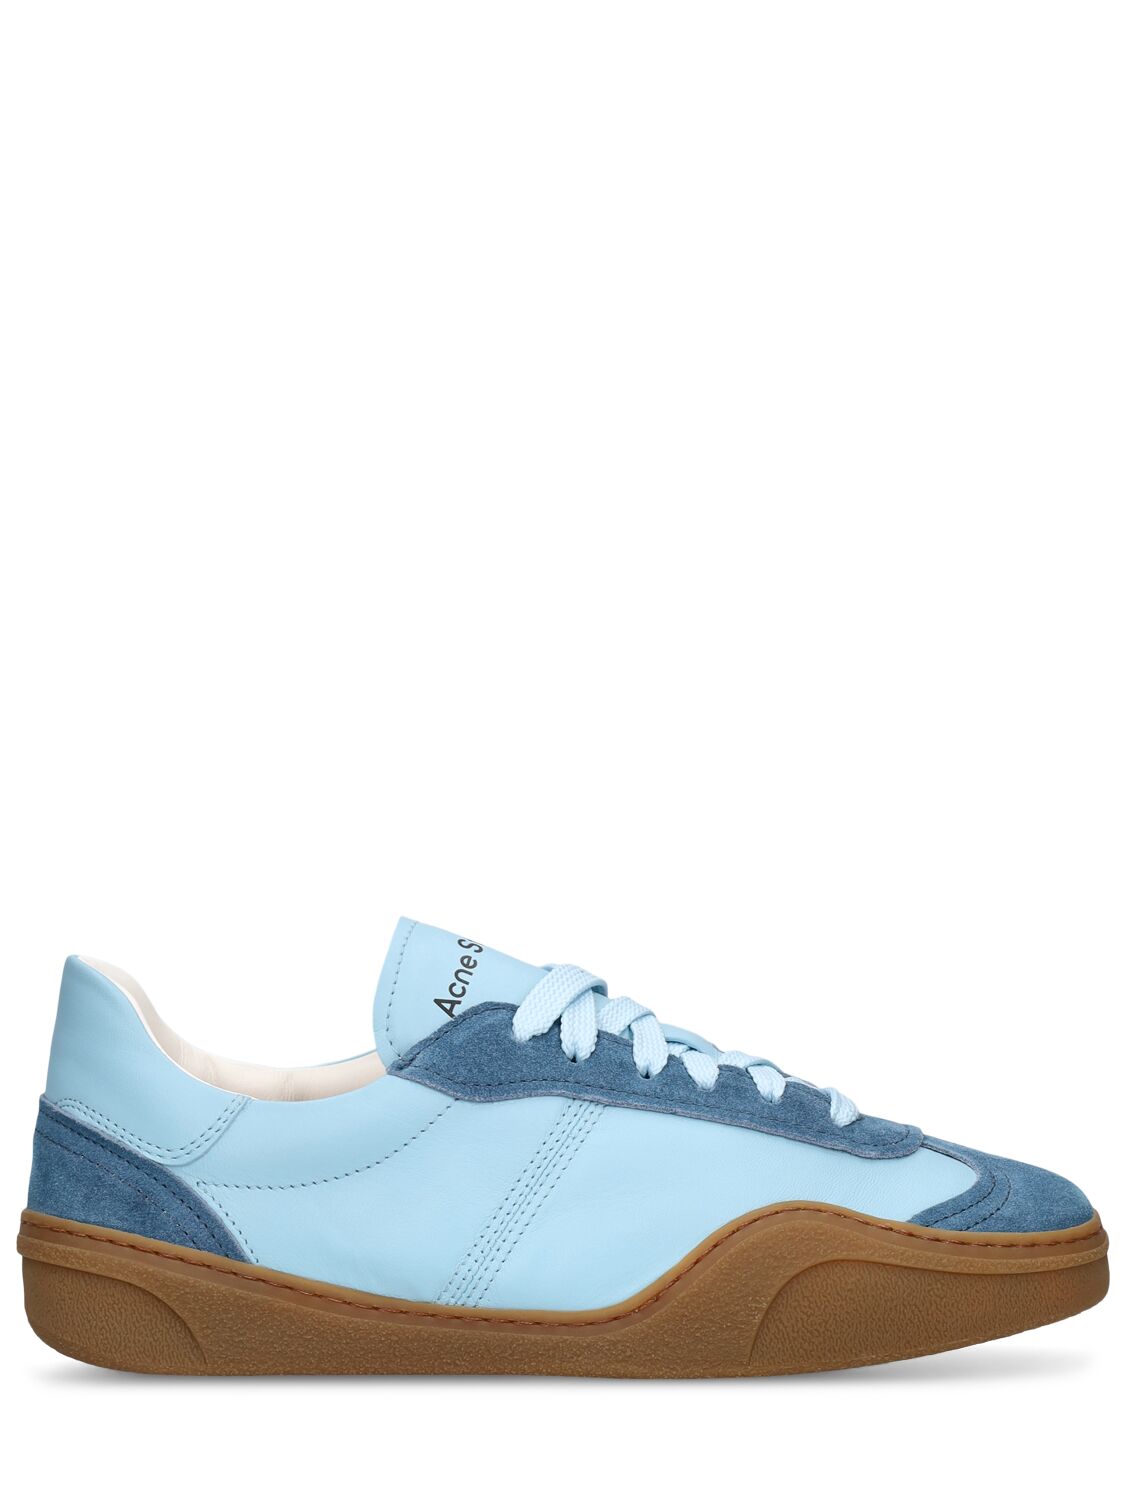 Acne Studios Bars Leather Trainers In Light Blue,tan